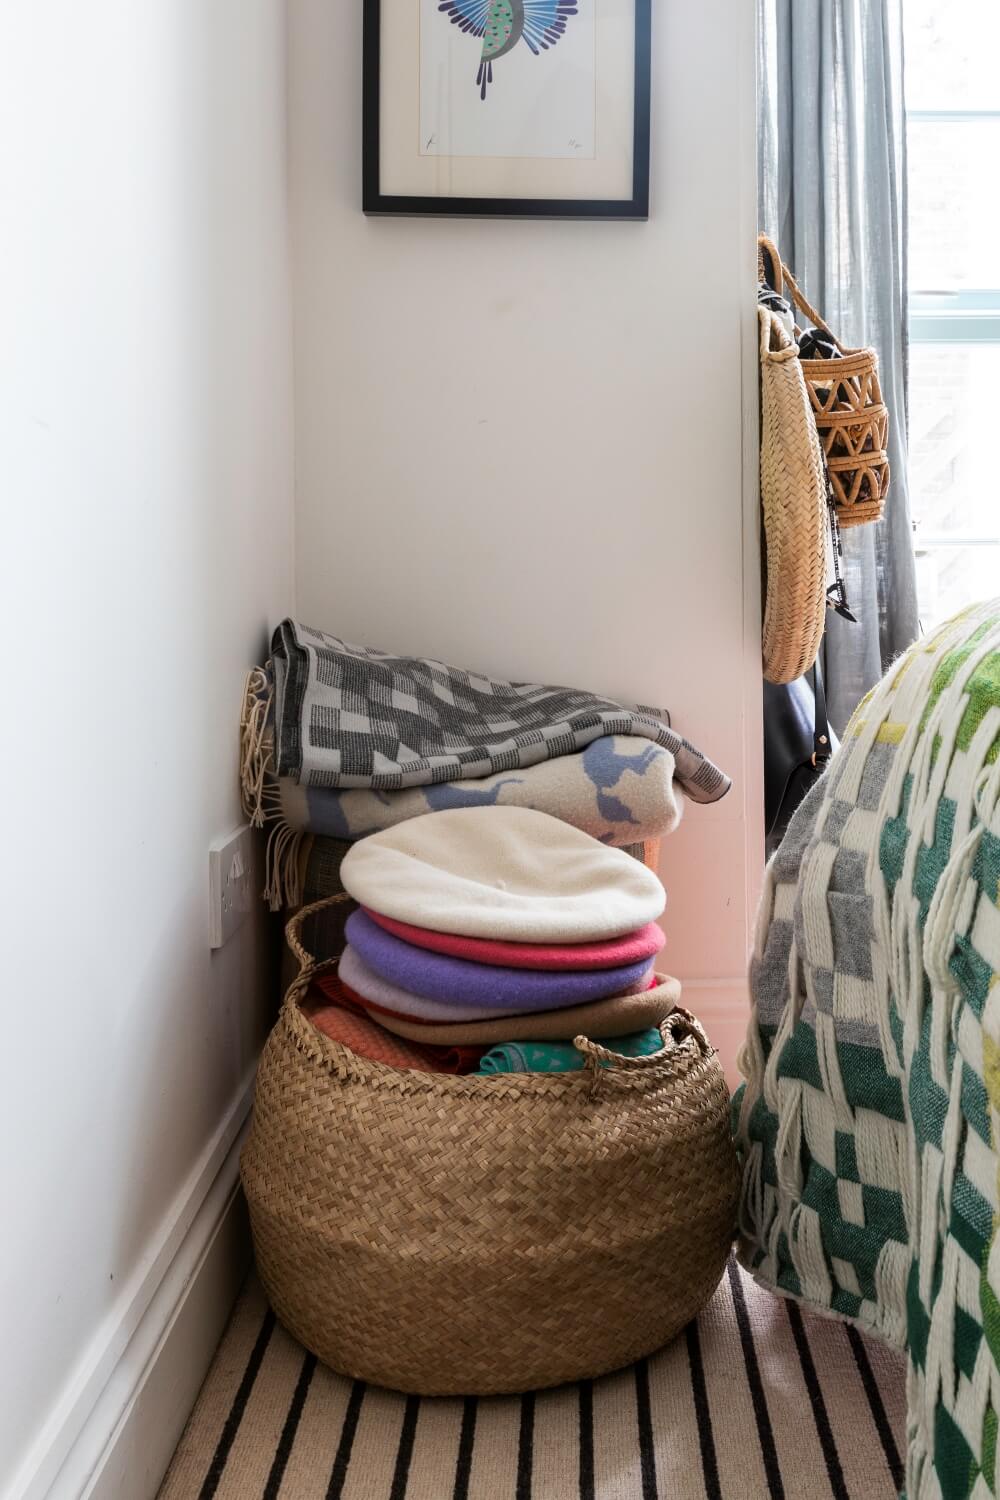 Small basket of hats next to the end of the bed for additional storage